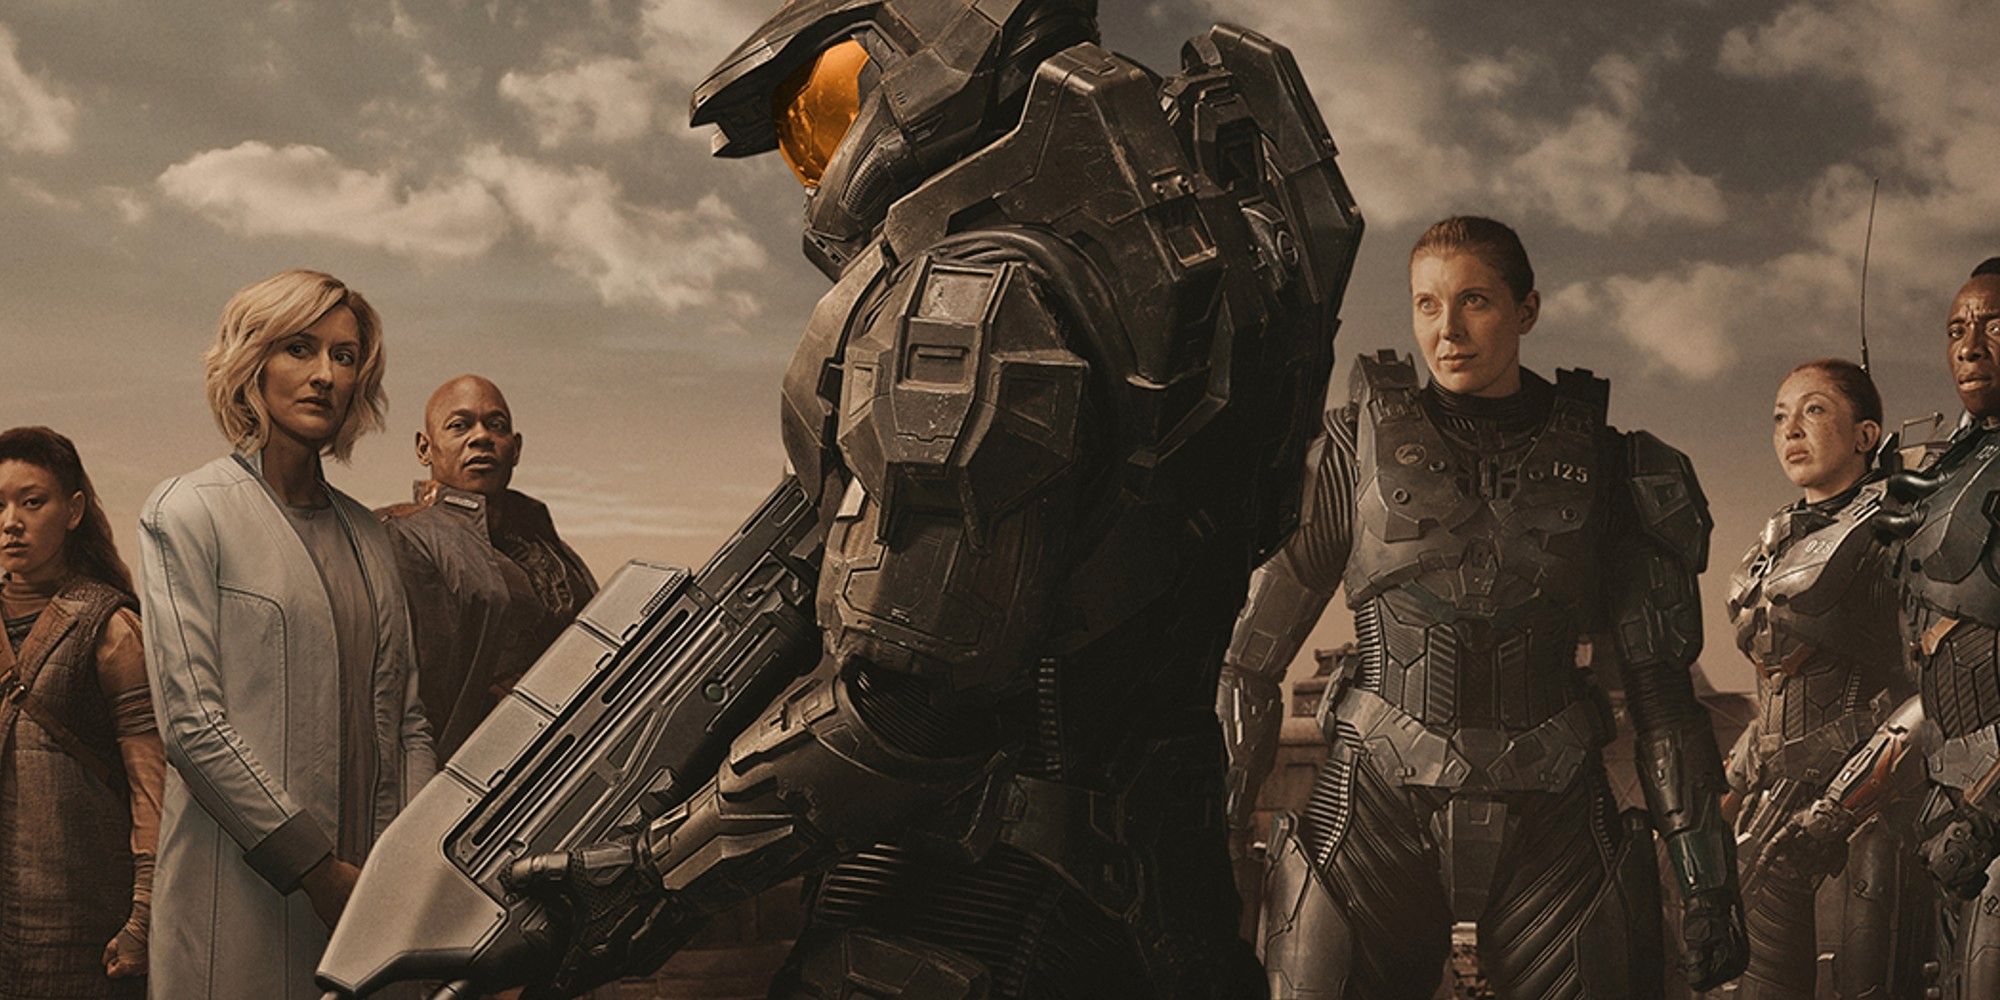 Halo TV Series (2022) Teaser Trailer from Paramount Plus drops!